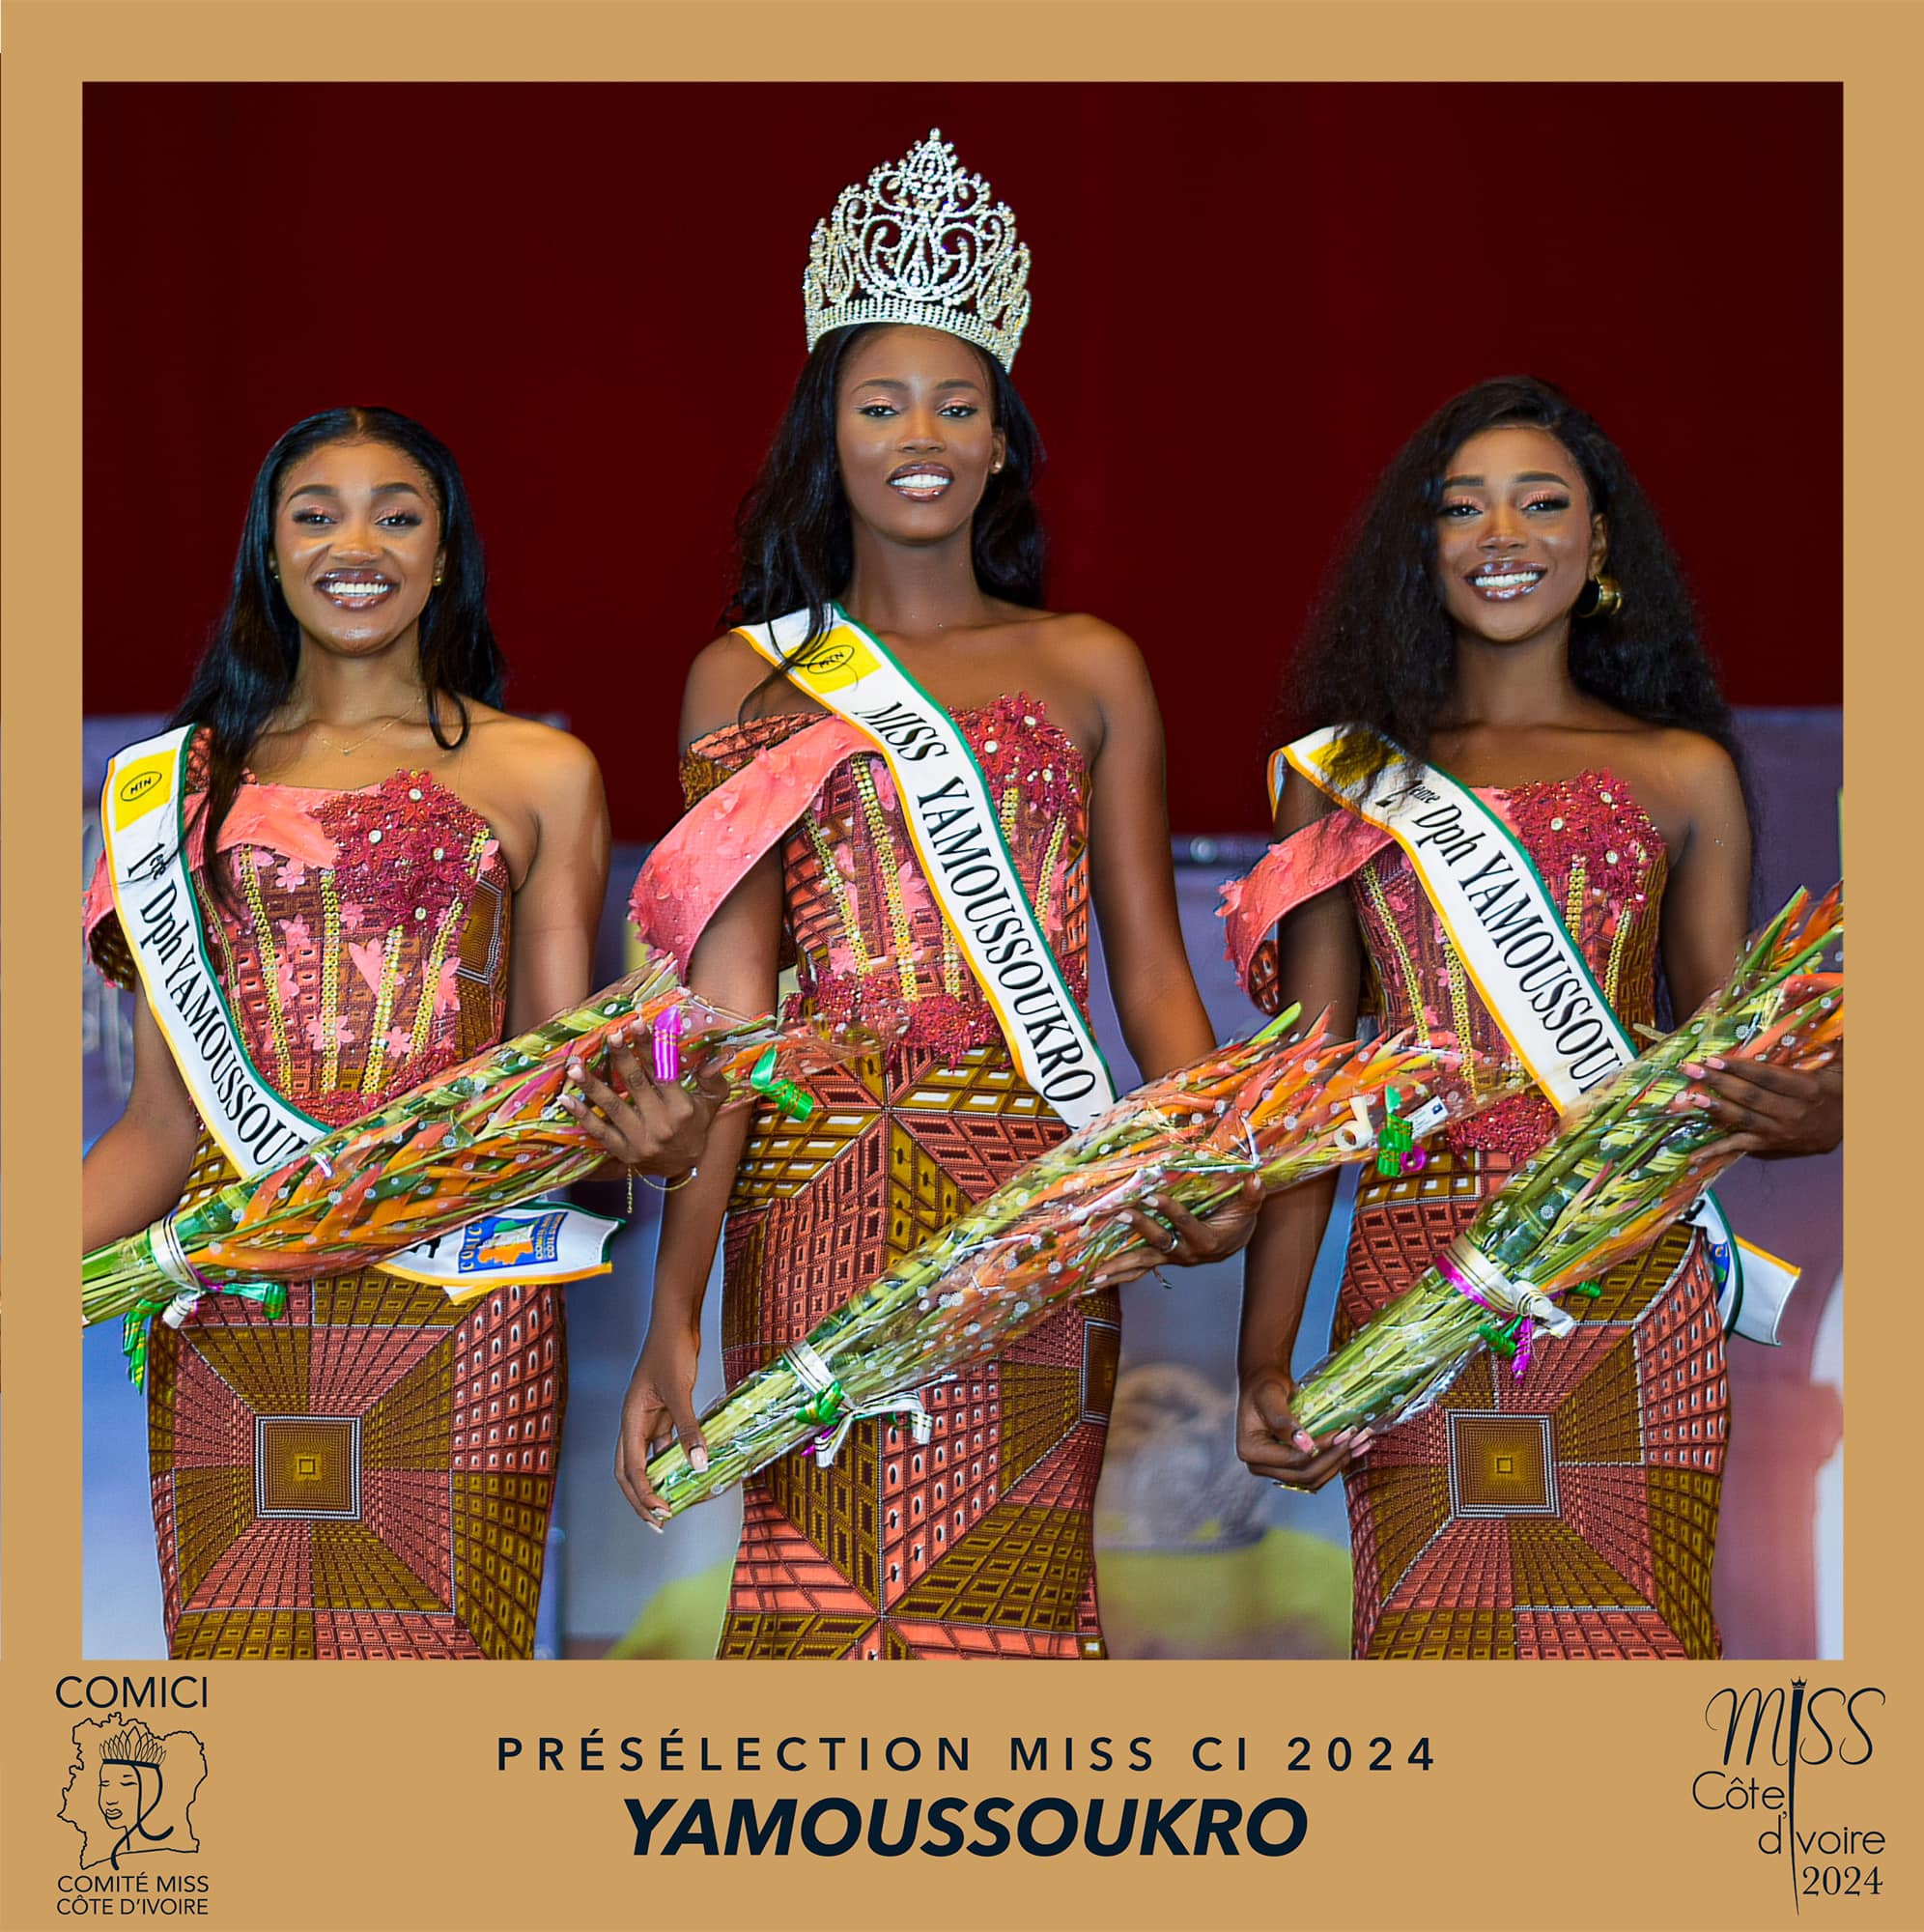 Preselection 9 Miss Cote d'Ivoire 2024 -  Finalist  Miss Yamoussoukro from District Yamoussoukro- Miss KONATE Dadida